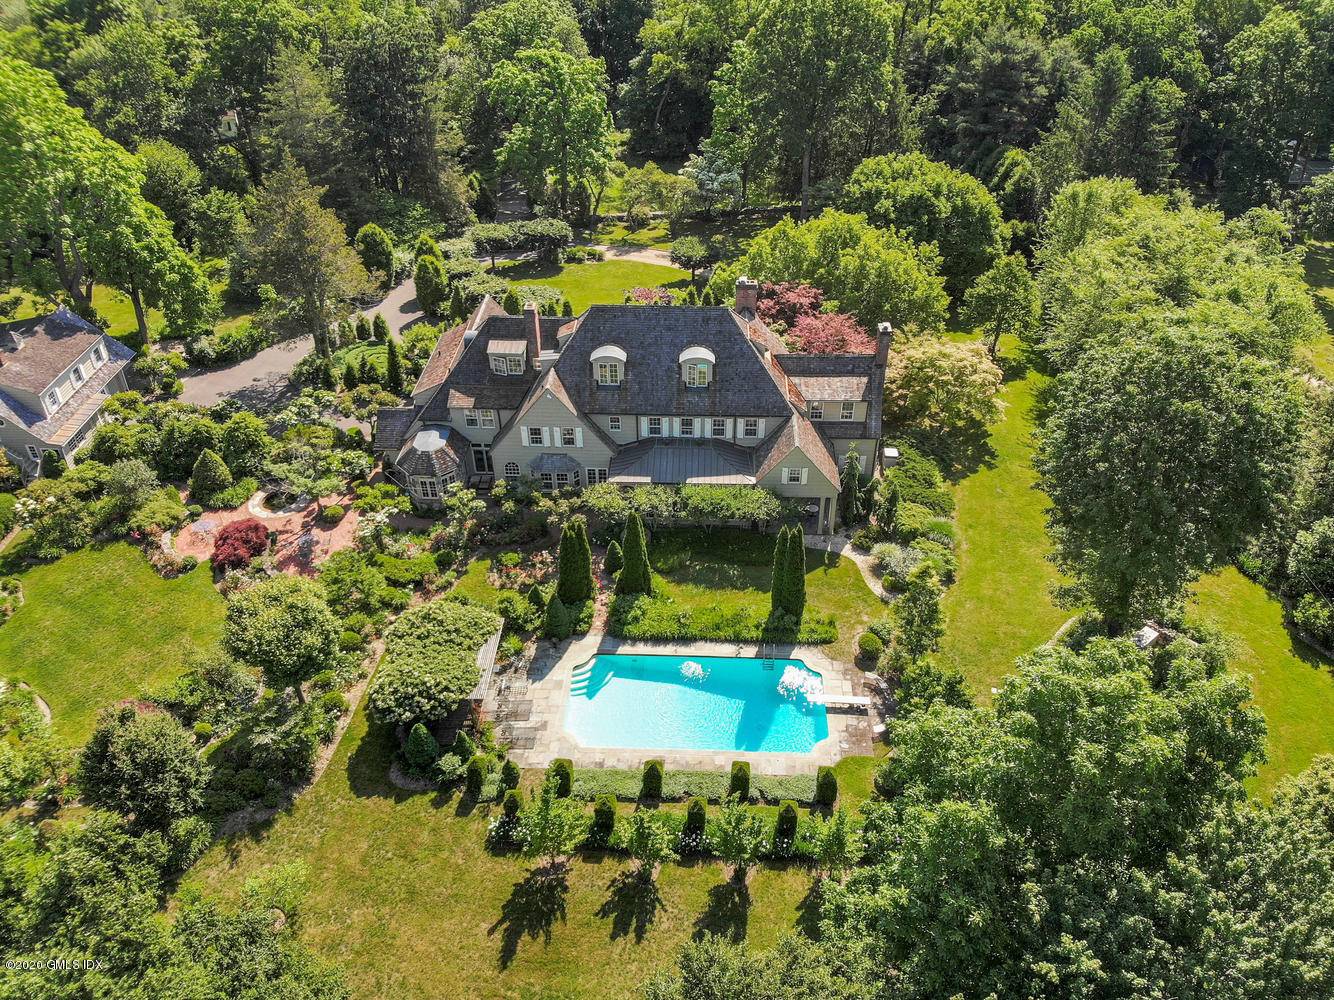 This beautiful country estate with pool and cottage is hidden from view off midcountry Lake Avenue.